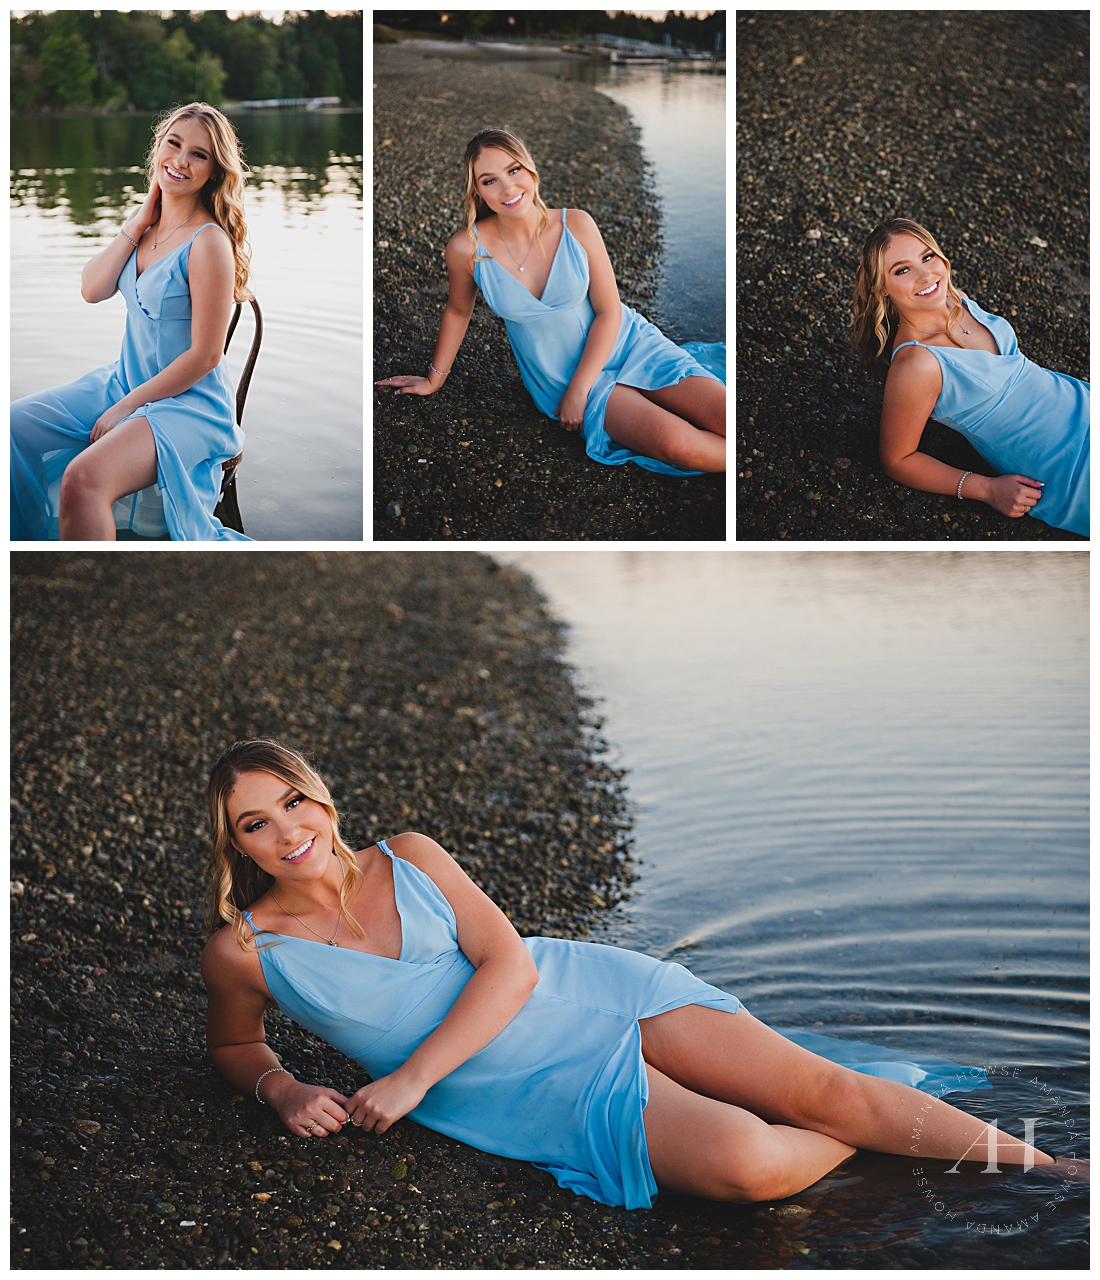 High School Senior in a Blue Dress on the Beach | Pose Ideas for Waterfront Portraits, Outfit Ideas for Summer Senior Portraits, How to Style a Beach Senior Portrait Session | Photographed by Tacoma's Best Senior Photographer Amanda Howse | Amanda Howse Photography